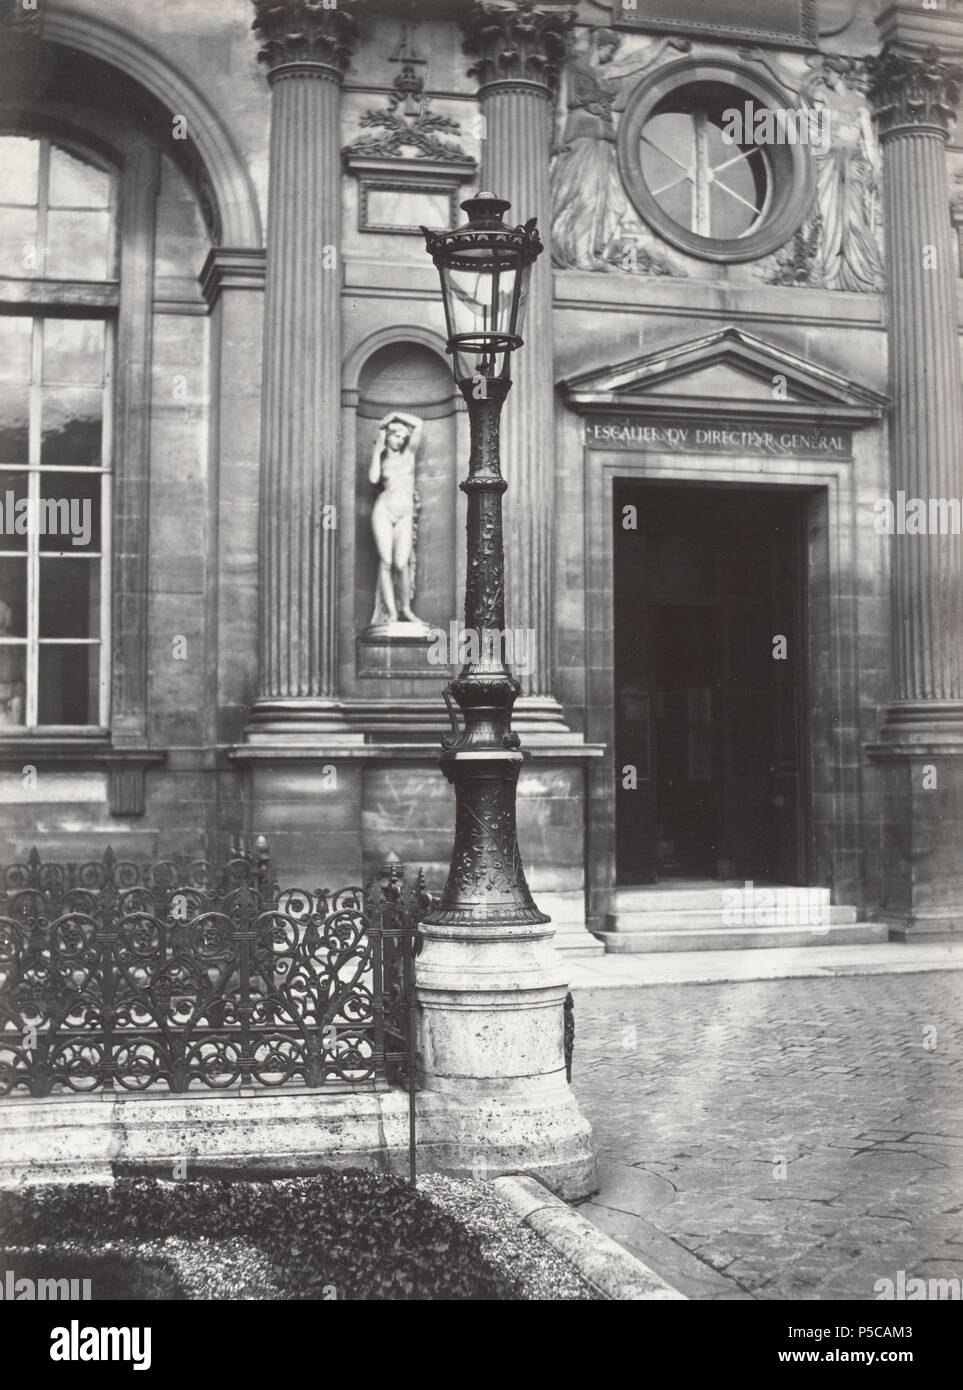 Louvre, (ancienne cour. escalier du Dr. [i.e. Diréctéur General]) no. 64. English: Single lantern on decorative iron lamp post mounted on stone base, wrought iron grille on left, doorway in right background with classical style statue in niche beside door. Niche statue: Bathsheba (1859), by Eugène Oudiné (1810-1887). North façade of the Cour Carrée in the Louvre palace, Paris. 1878. N/A 327 Charles Marville, Louvre, ancienne cour, 1878 Stock Photo